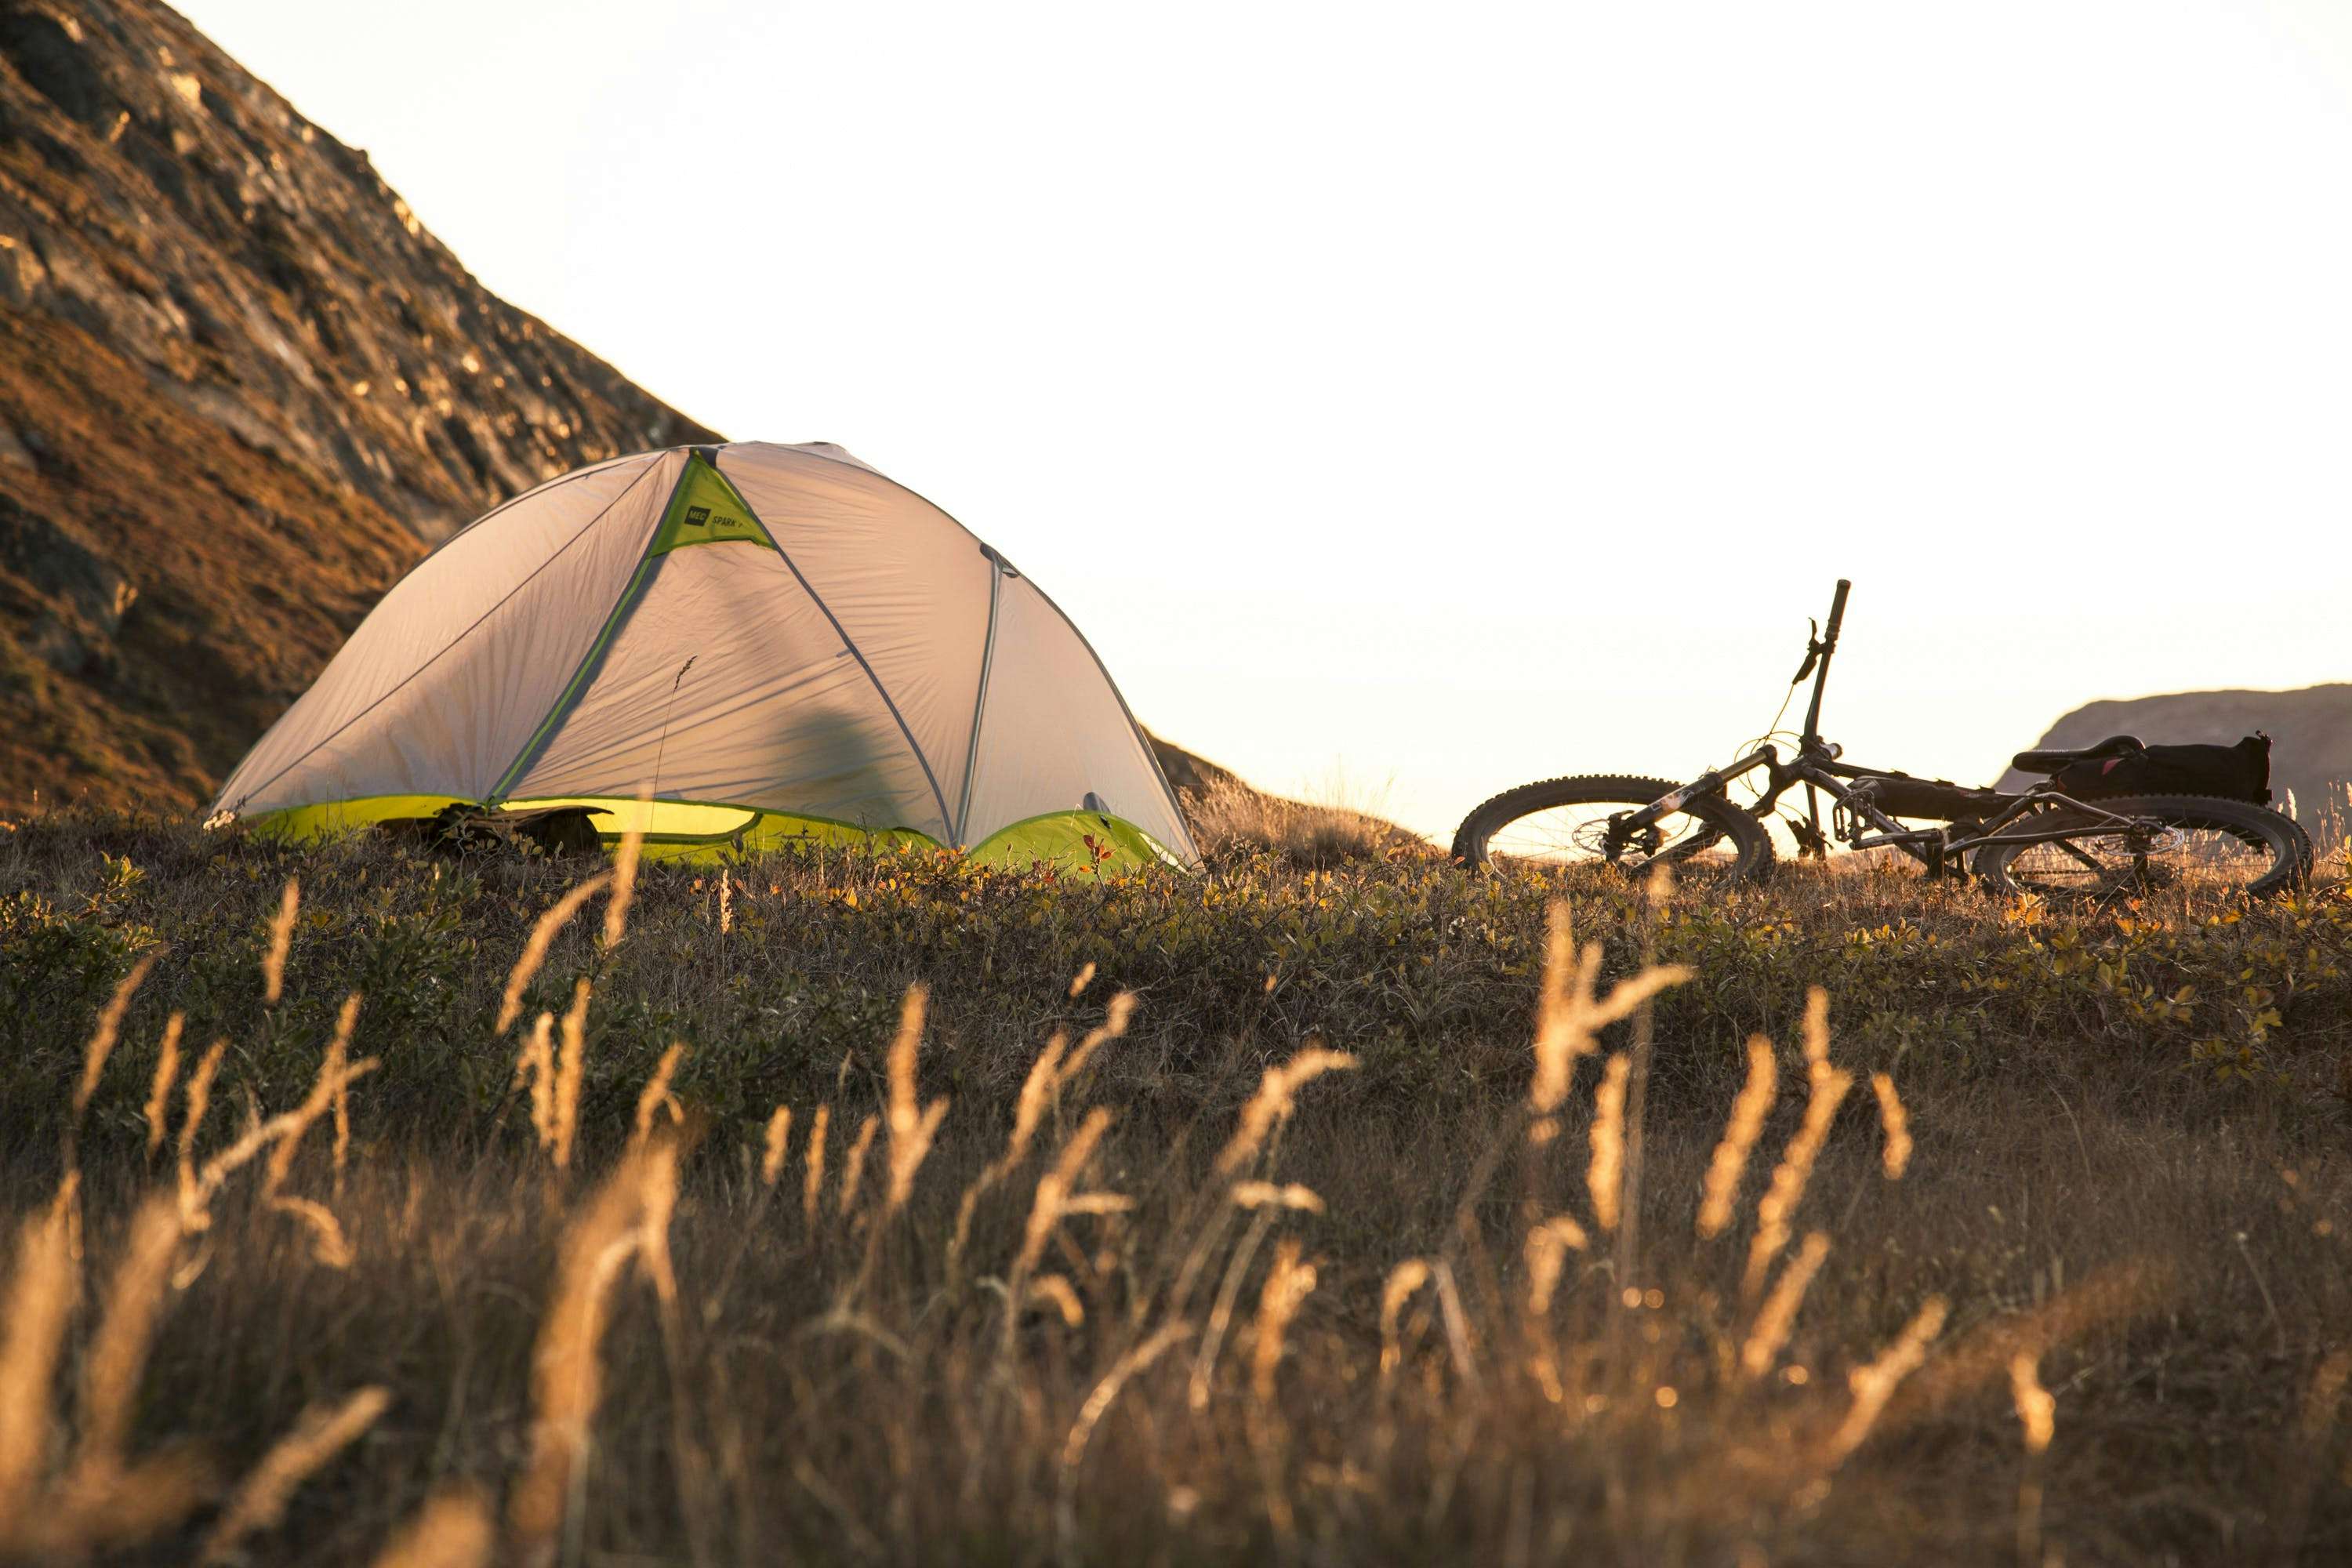 A bike lies on its side next to a small tent, silhouetted against a bright sky.